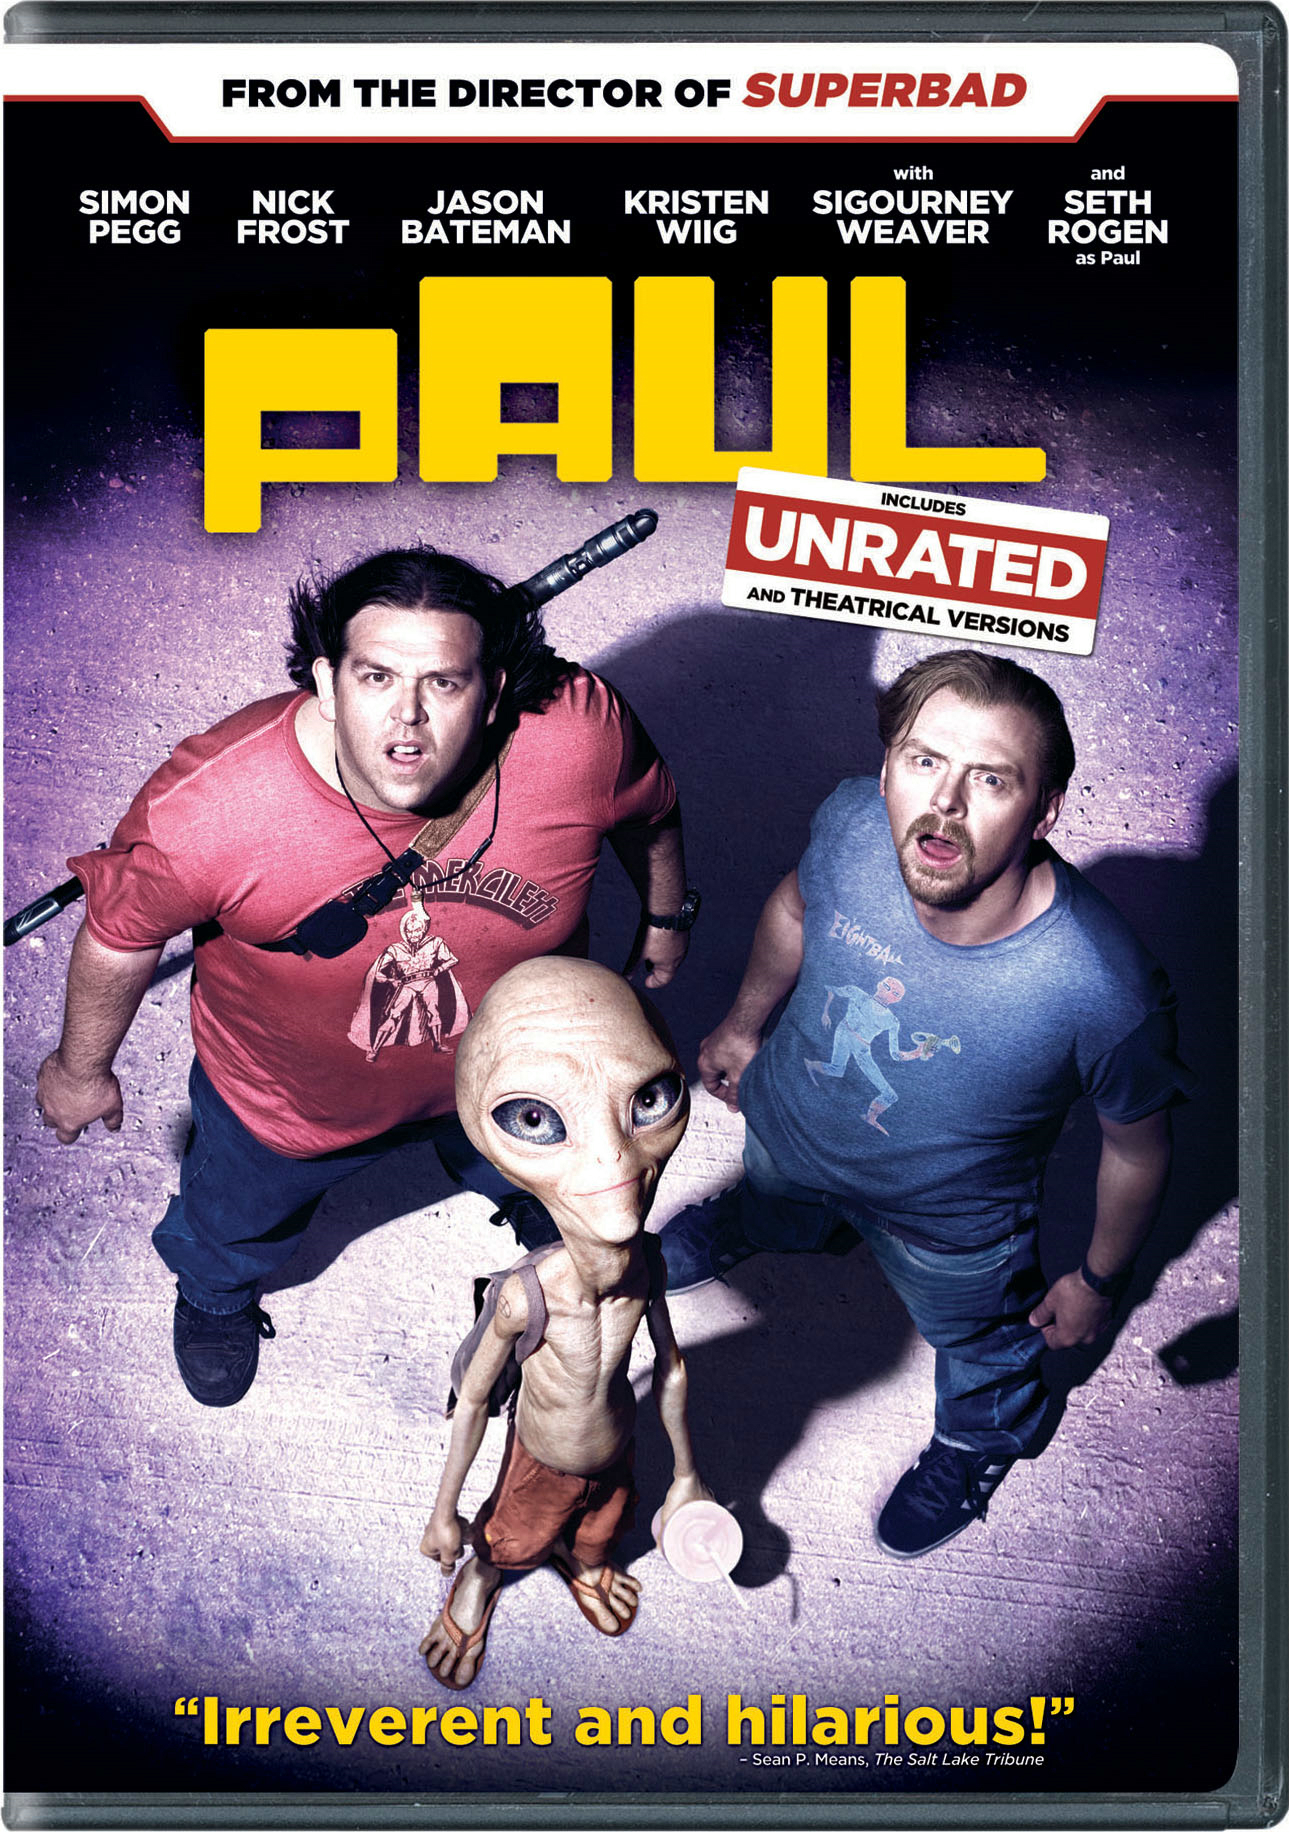 Paul (DVD Widescreen) - DVD [ 2011 ]  - Comedy Movies On DVD - Movies On GRUV